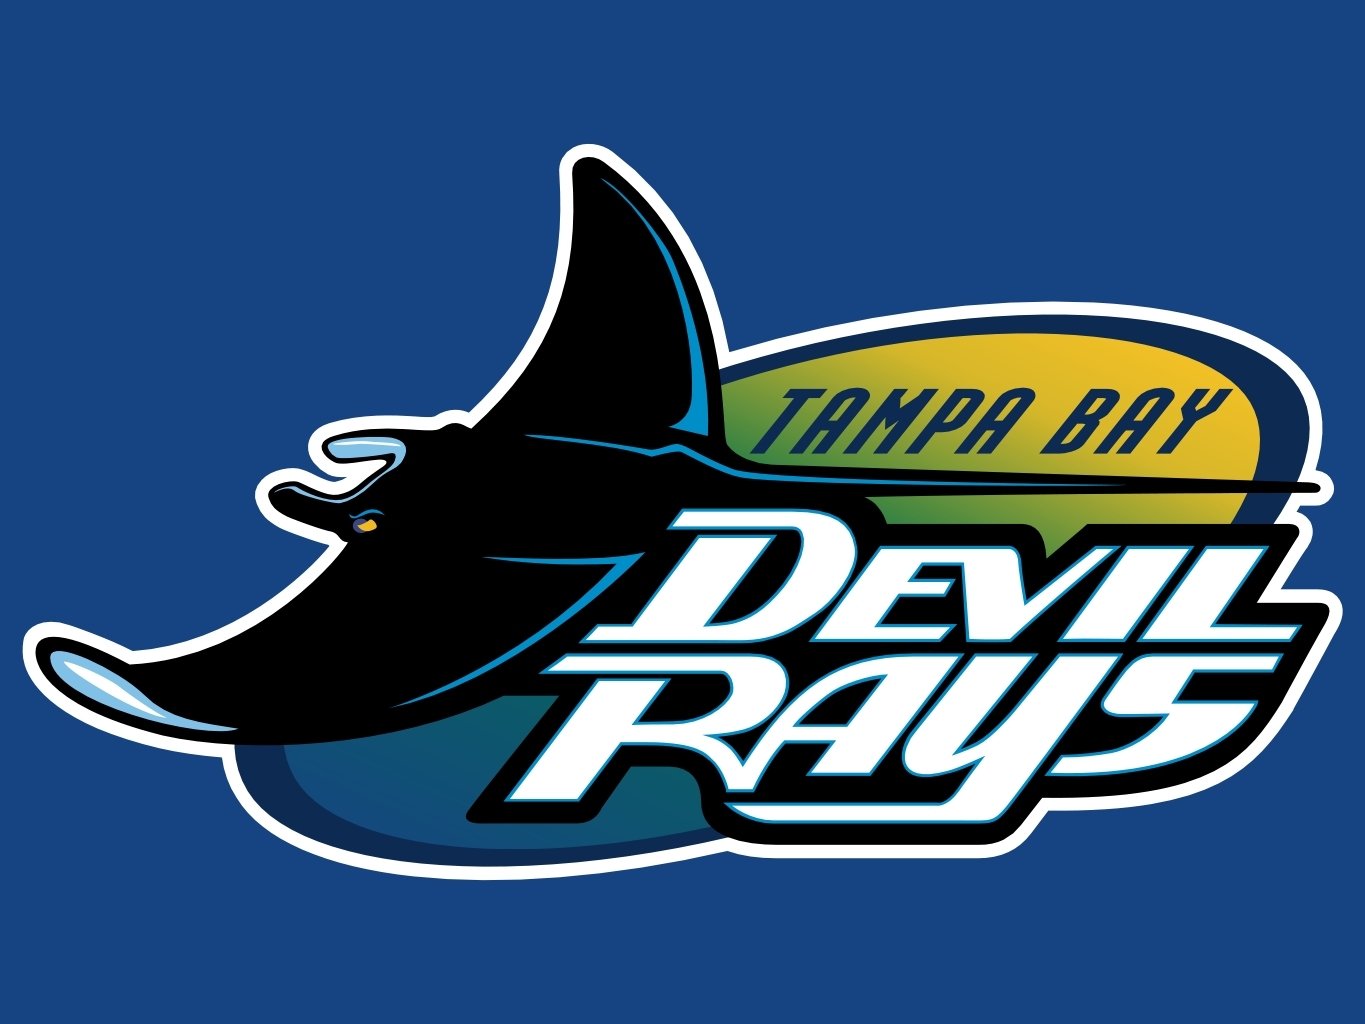 Tampa Bay Rays wallpaper by counsellornh - Download on ZEDGE™